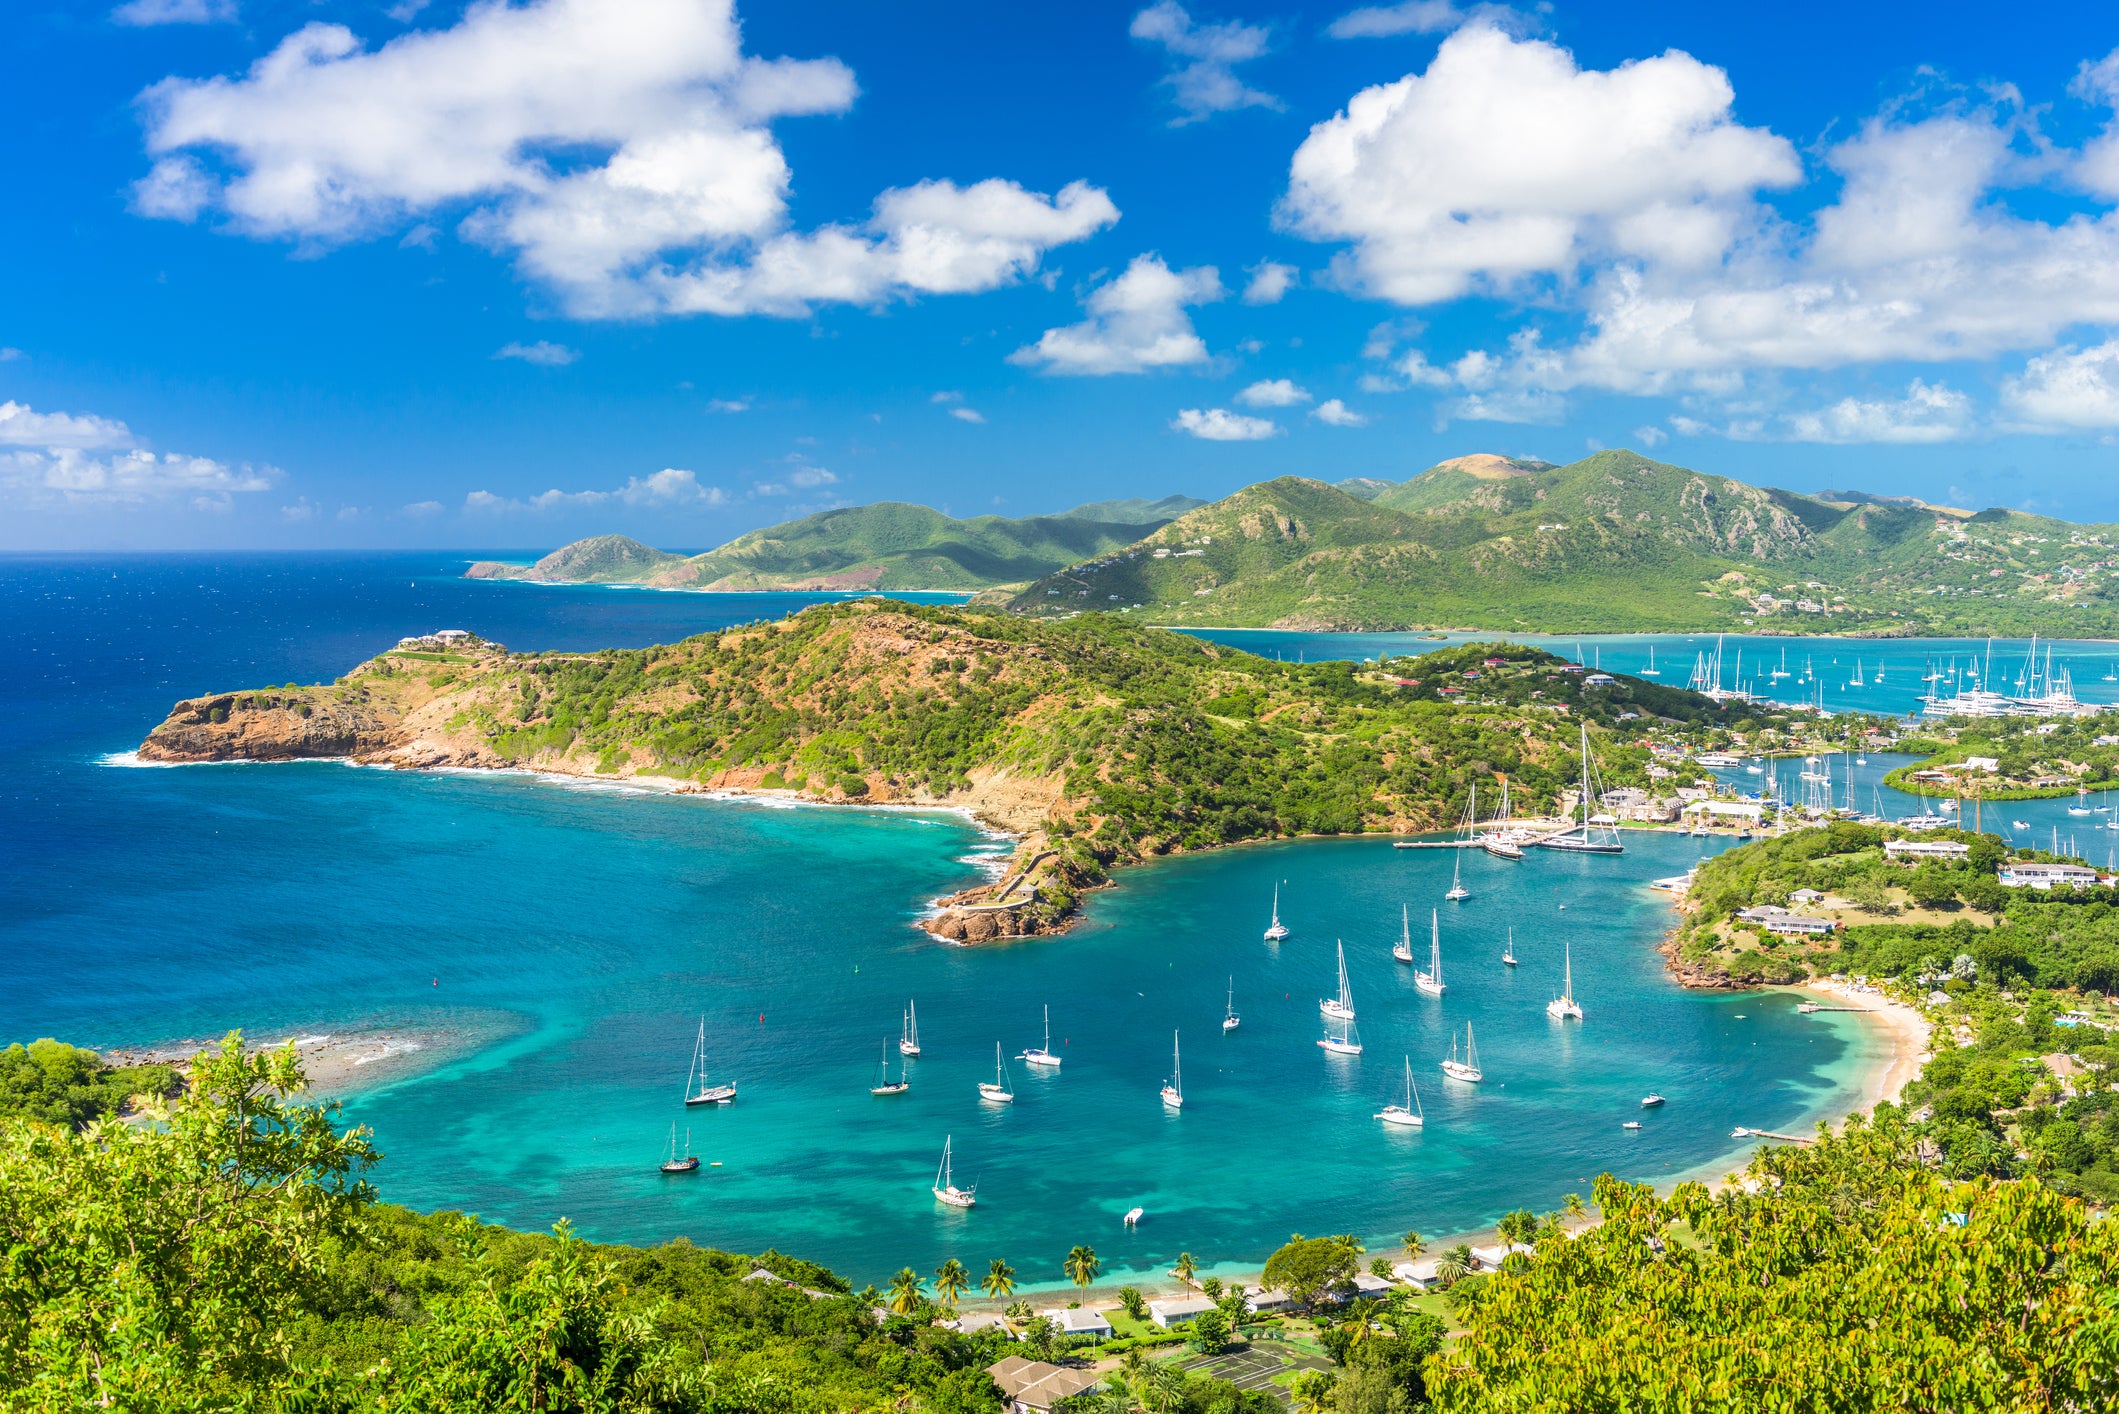 Antigua tempts with white sand beaches and warm blue waters